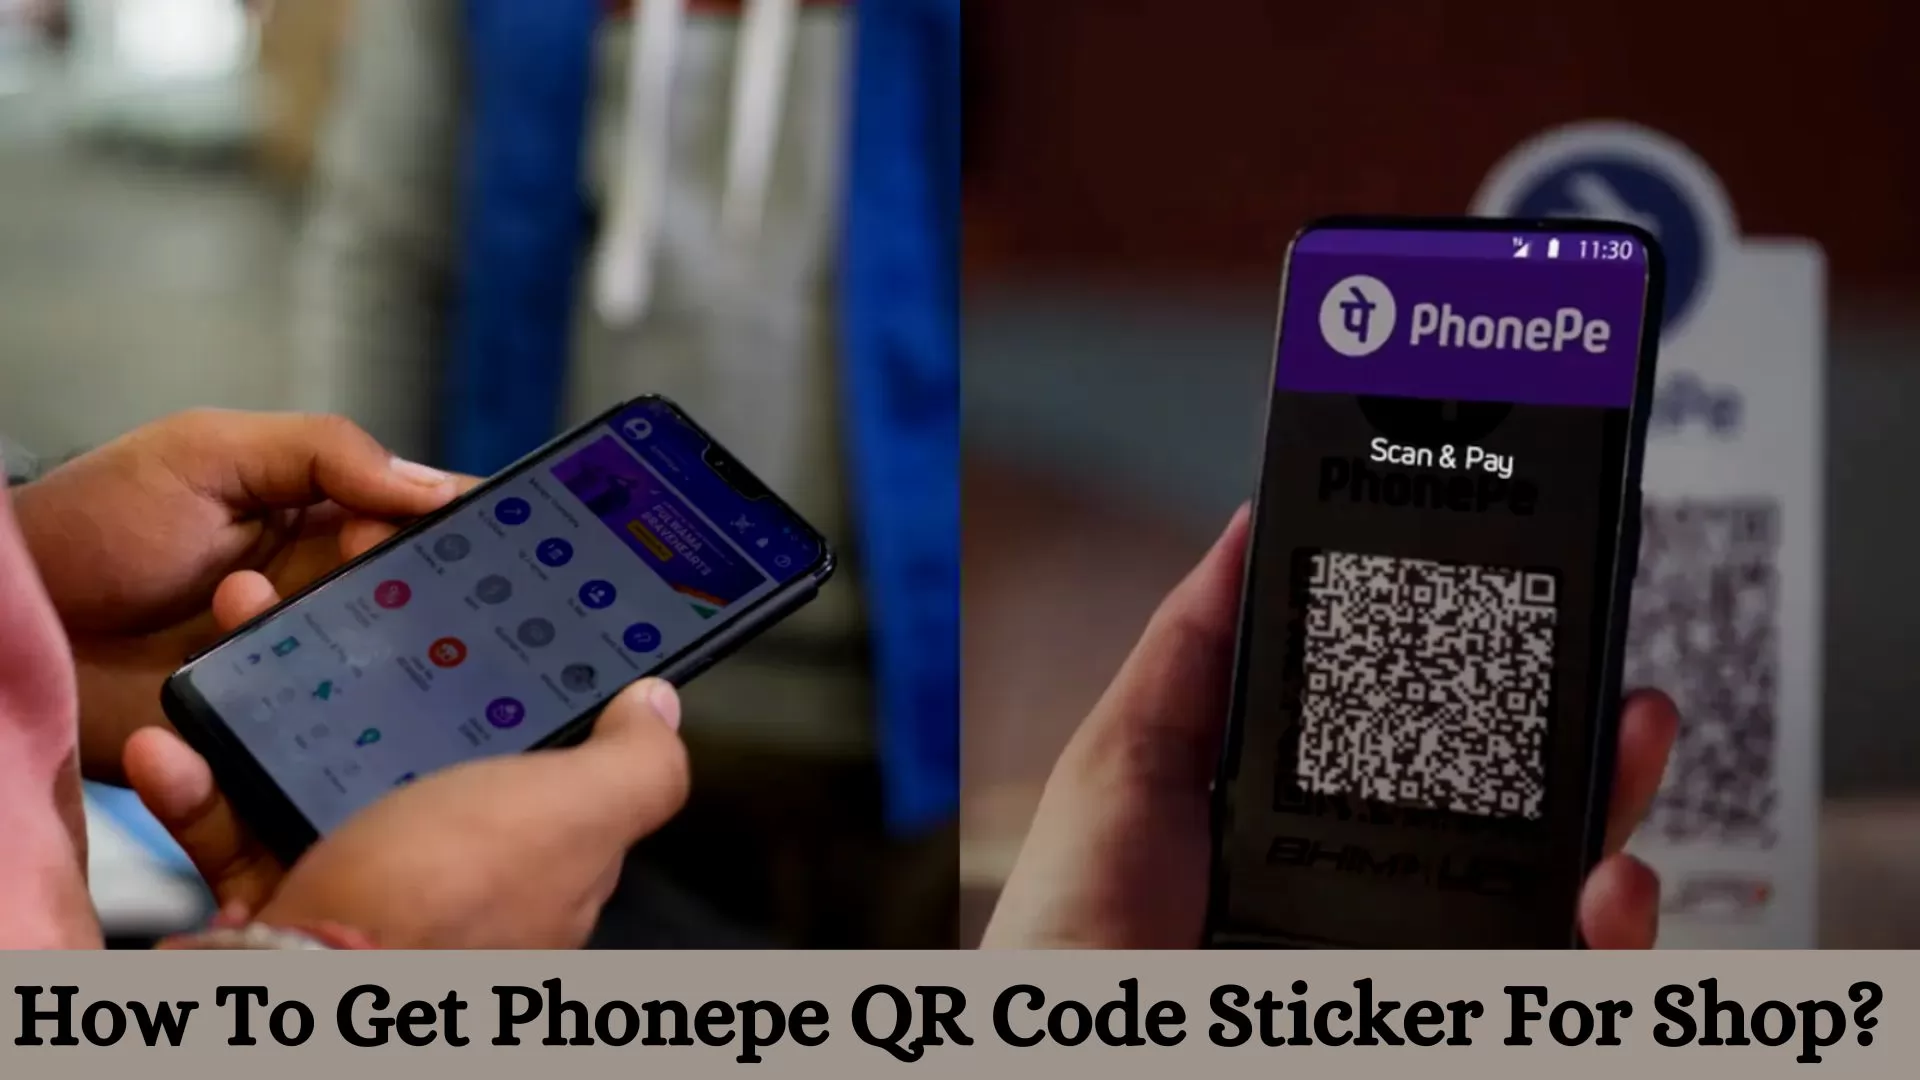 How To Get Phonepe QR Code Sticker For Shop